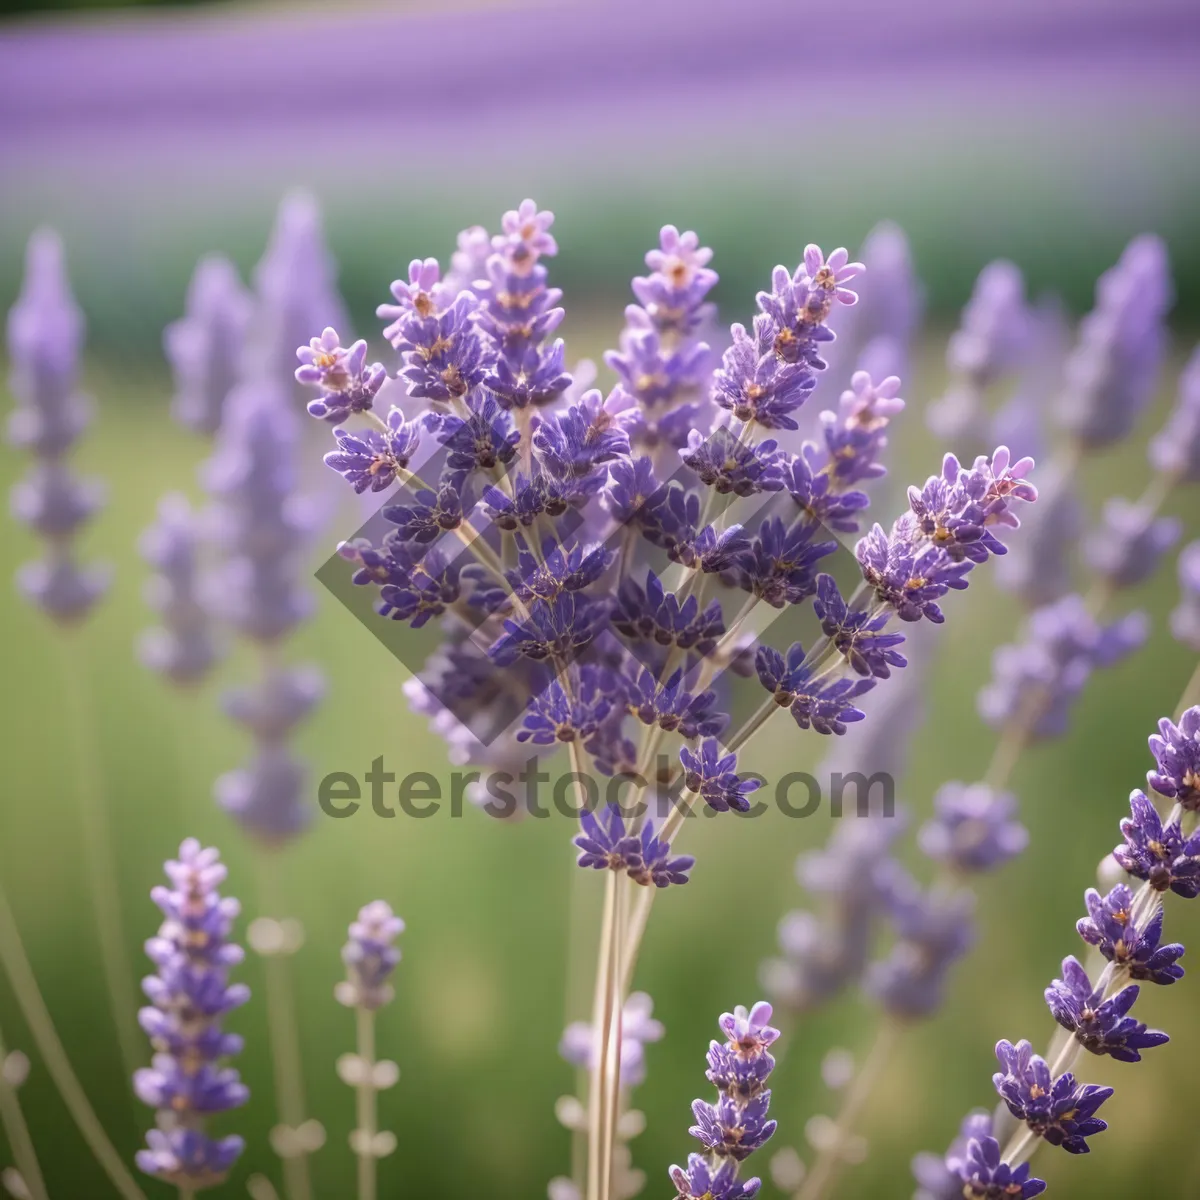 Picture of Blooming Lavender Field in Rural Countryside